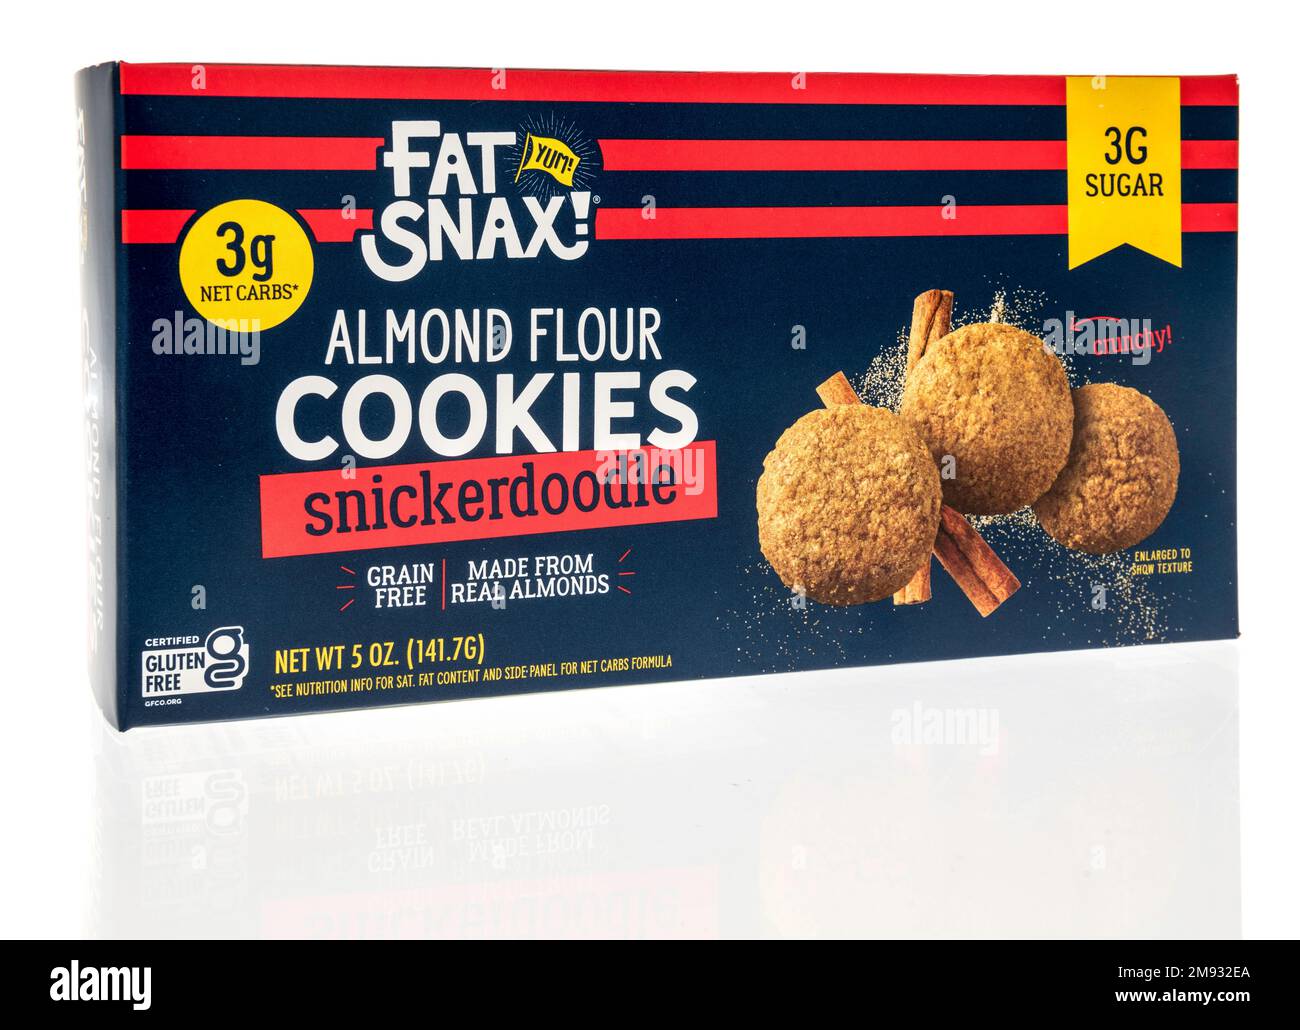 Winneconne, WI - 8 January 2023: A package of Fat Snax almound flour cookies snickerdoodle on an isolated background. Stock Photo